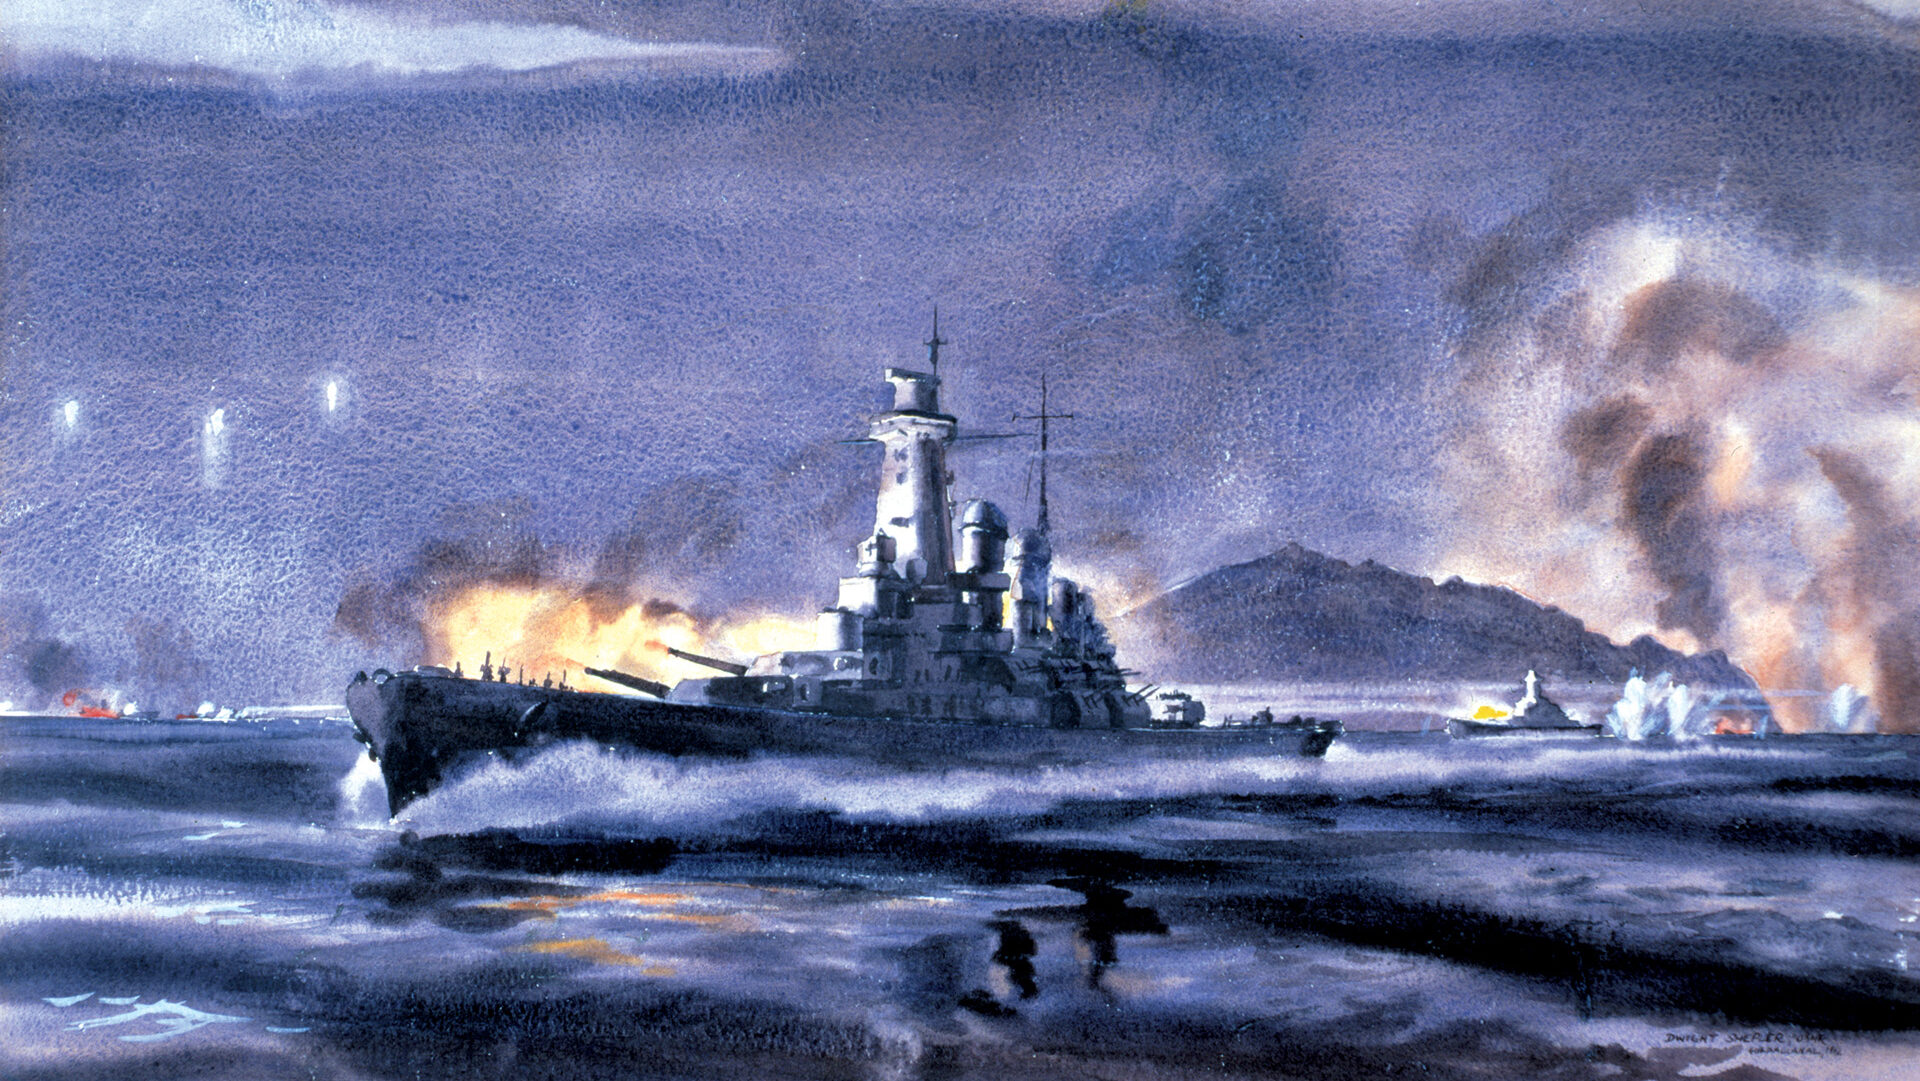 U.S. warships fire salvos during the Battle of Savo Island, a night action near Guadalcanal in which four Allied cruisers were lost.